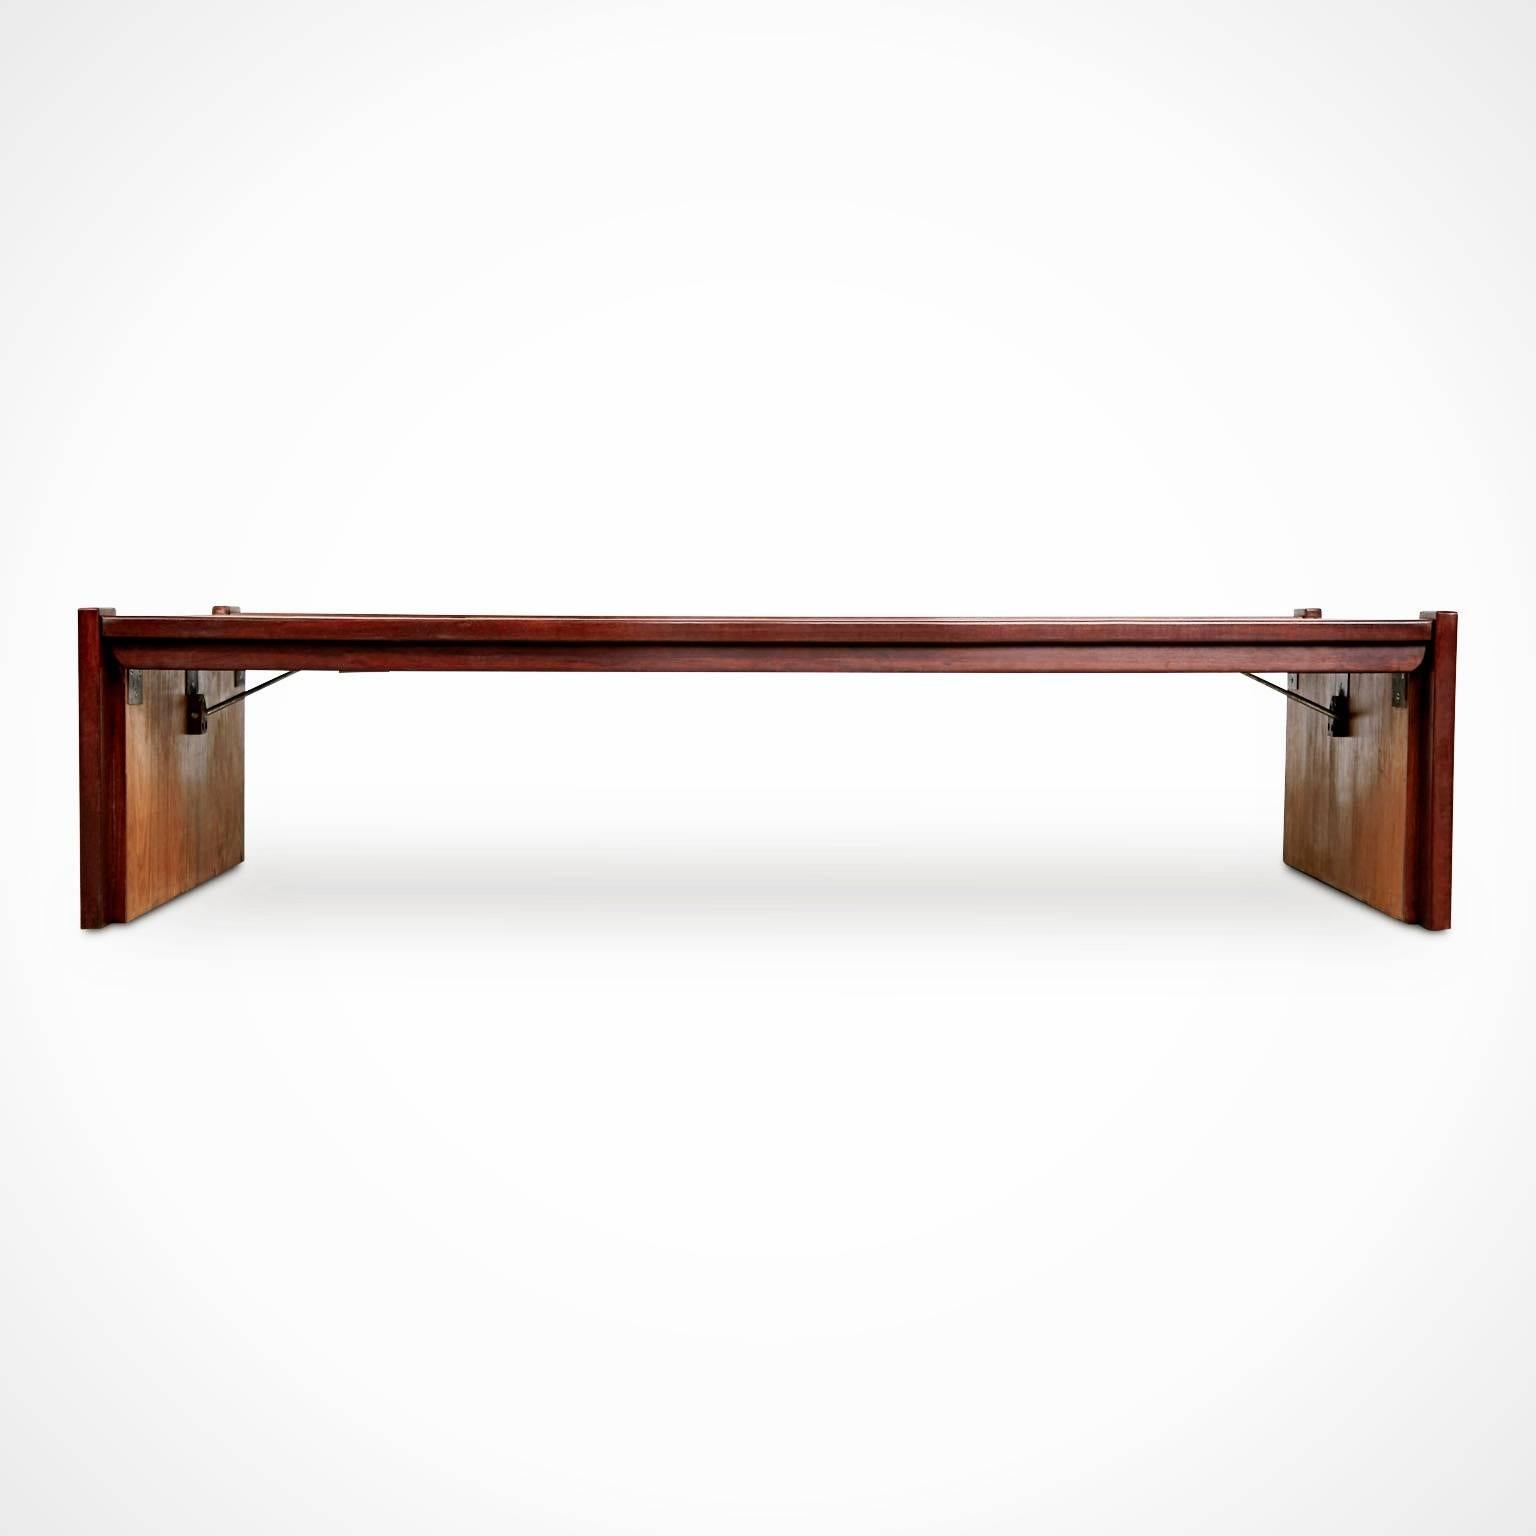 Mid-Century Modern Percival Lafer Exotic Wood Long Coffee Table for L'atelier De Sao Paulo, Brazil